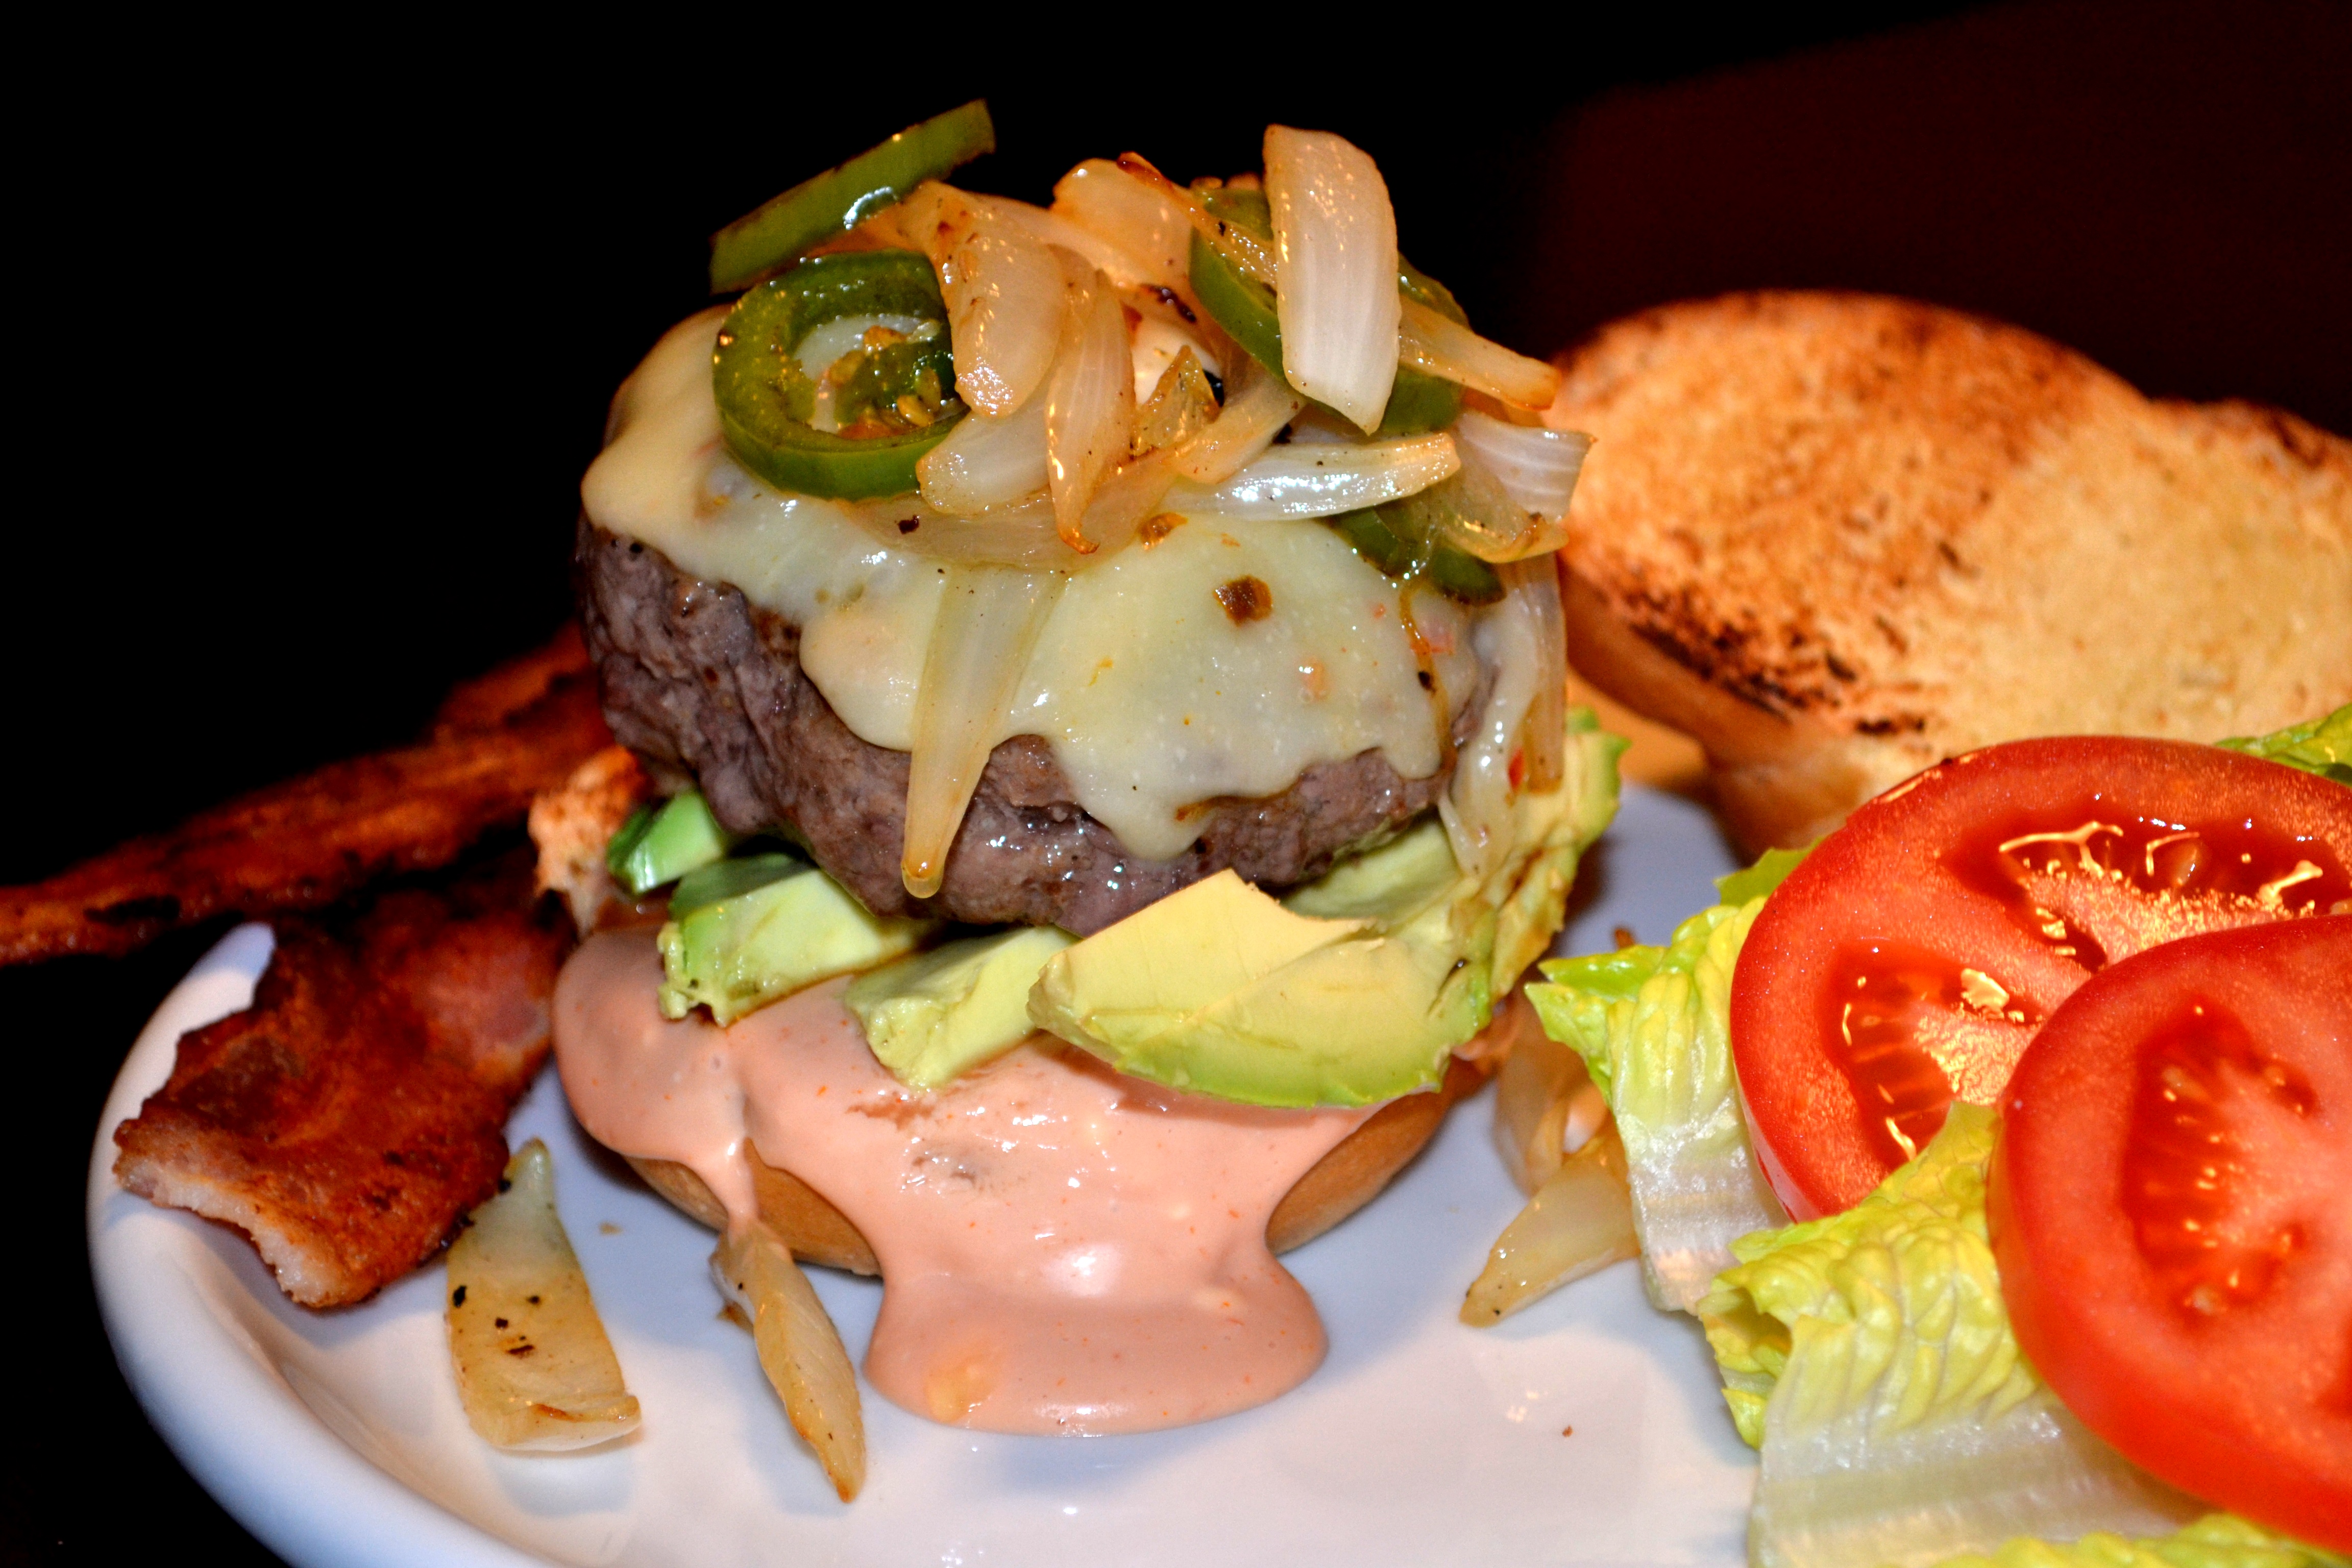 Jalapeno & Onion White Cheddar Burgers with Bacon & Avocado